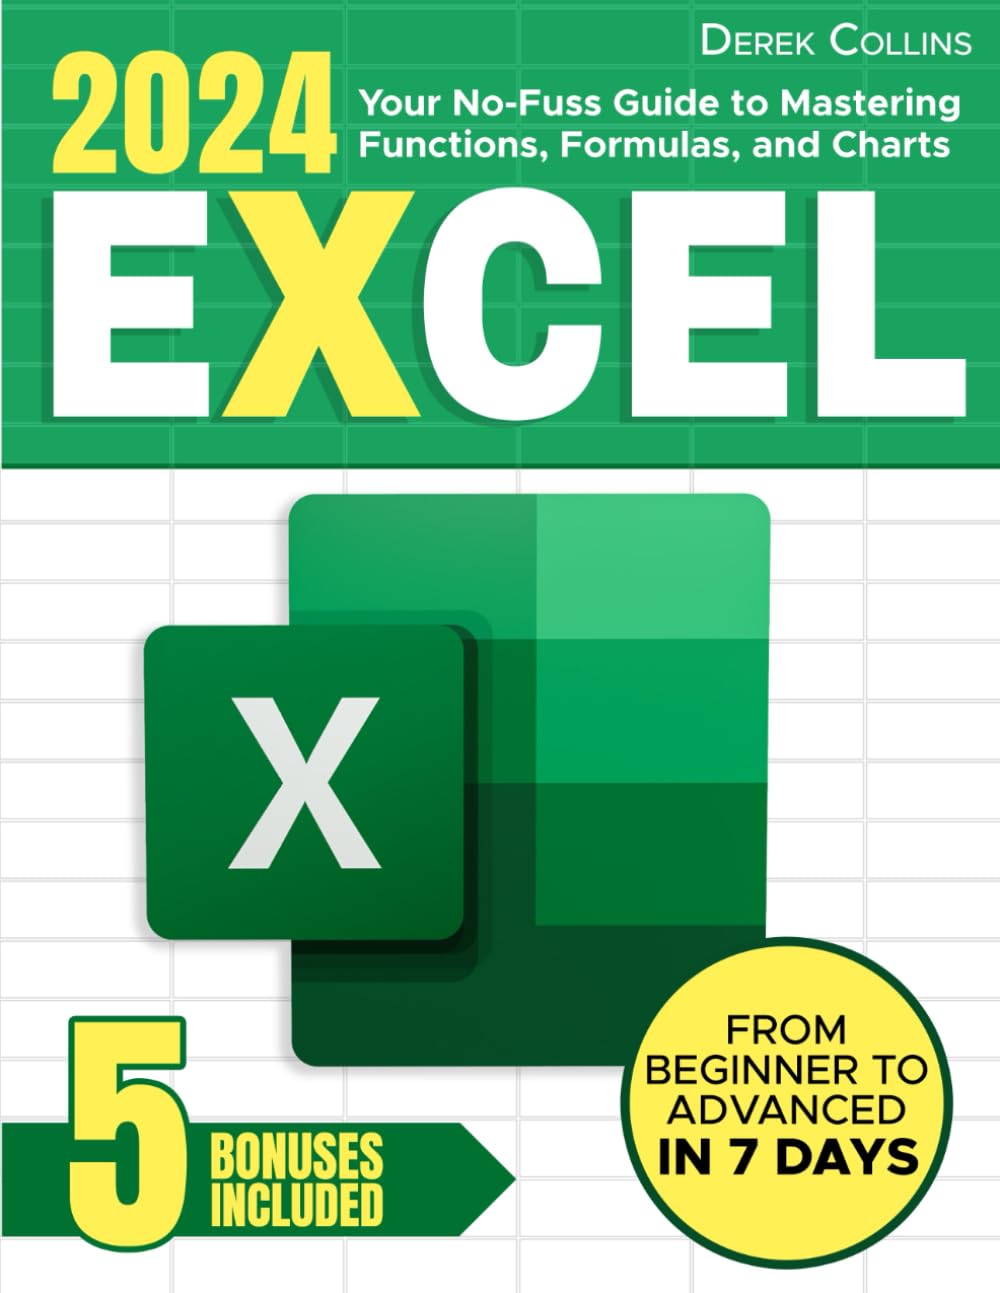 Excel: Your No-Fuss Guide to Mastering Functions, Formulas, and Charts: Step-by-Step Instructions and Expert Tips for Rapid Learning | From Beginner to Advanced in 7 Days